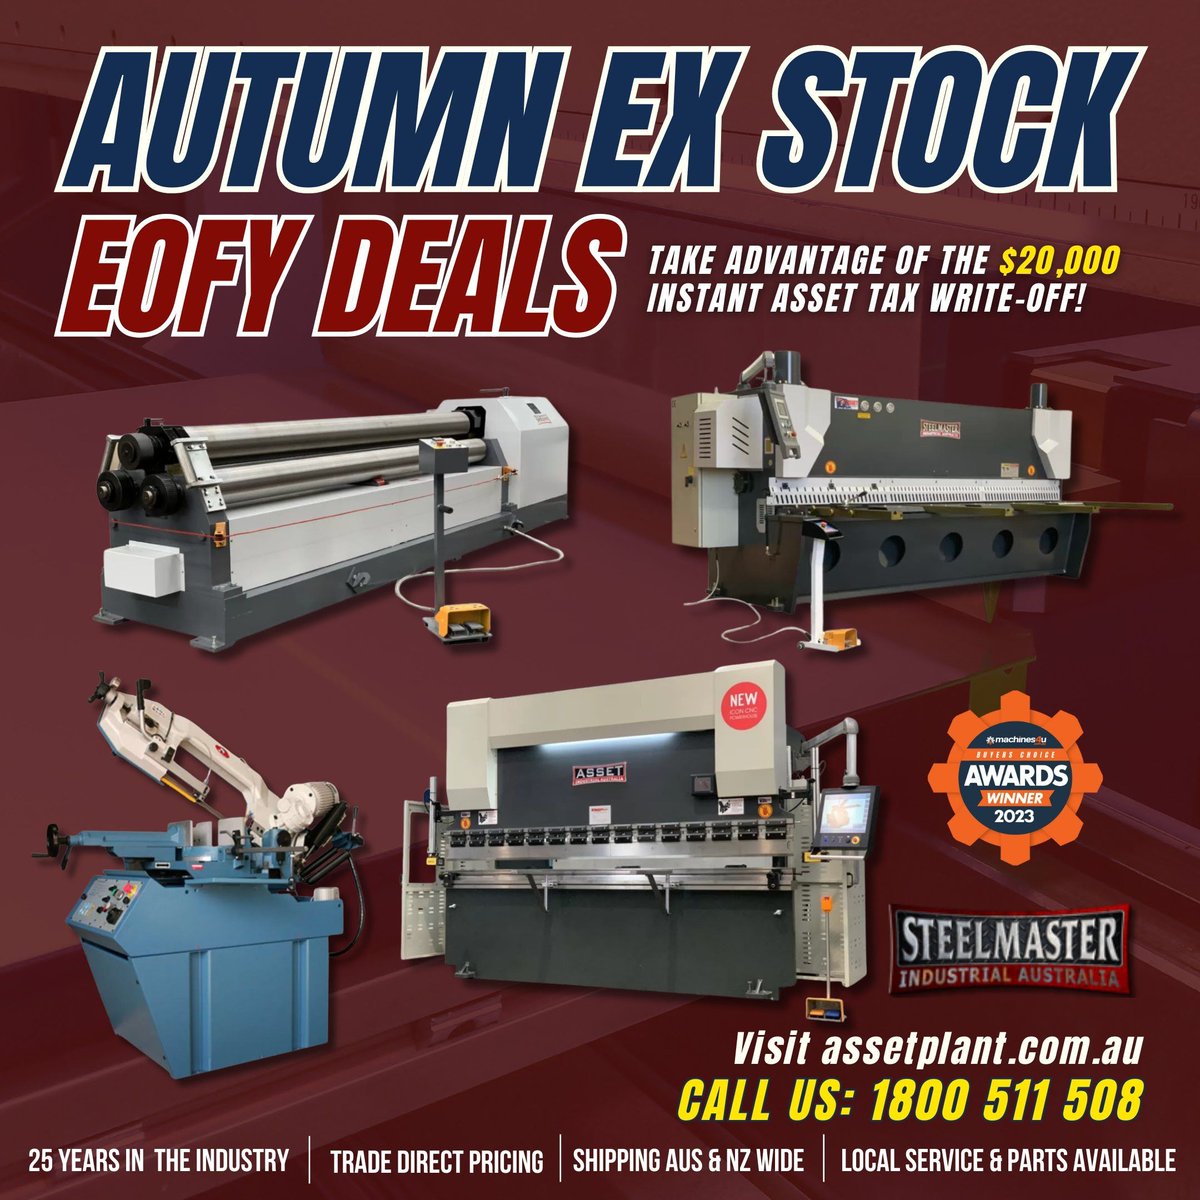 Lowest Prices Offered on these Floor Stock Machines! Don't miss this batch of EOFY Sale! Visit assetplant.com.au/on-sale-produc… for more hot deals or call us on 1800 511 508. #metalworking #metalworkingmachinery #australianbrand #steelmaster #metalfabricaton #steelfabrication